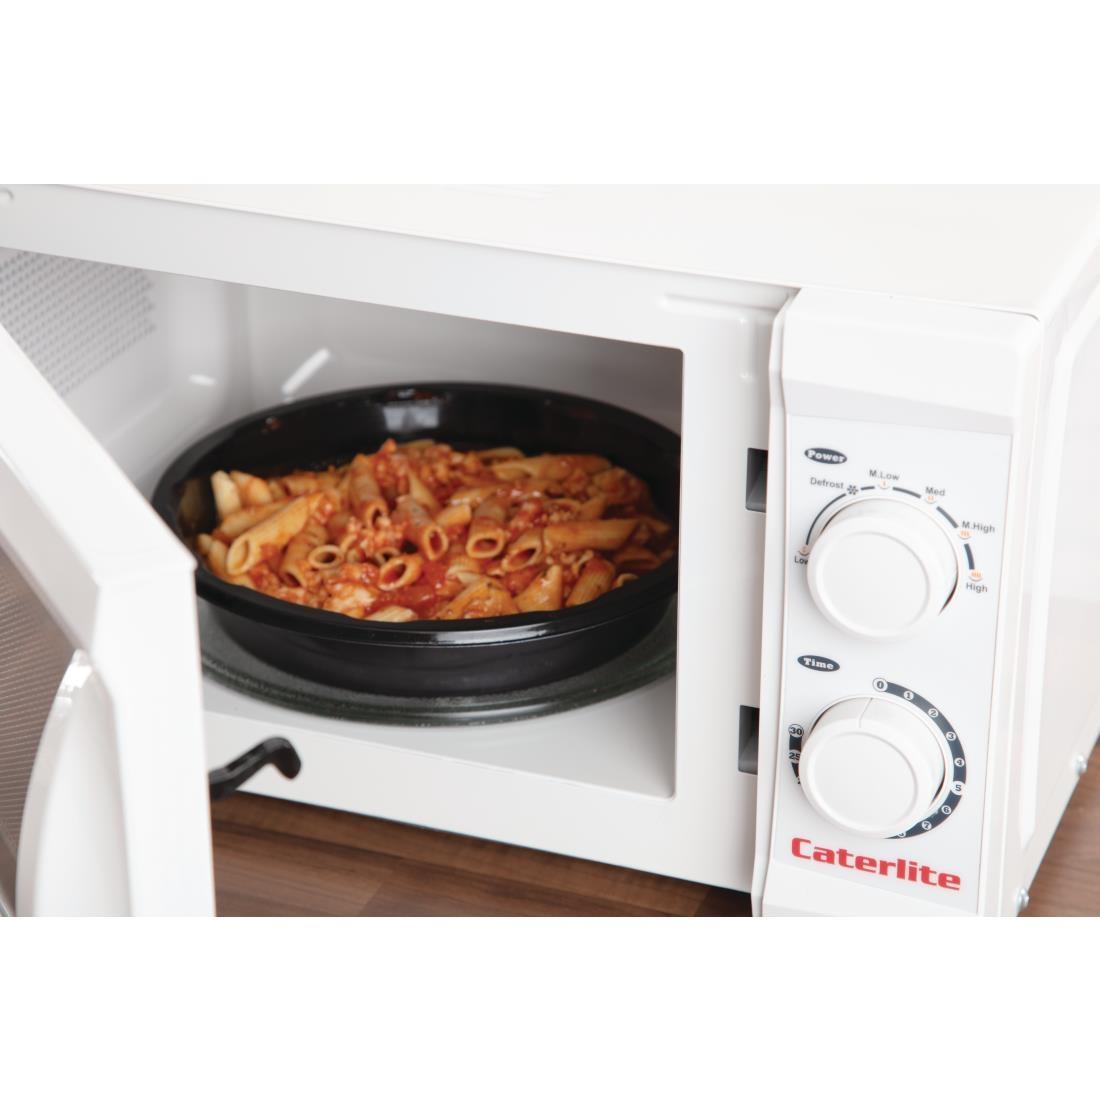 Caterlite Compact Microwave 17ltr 700W - CN180  - 2